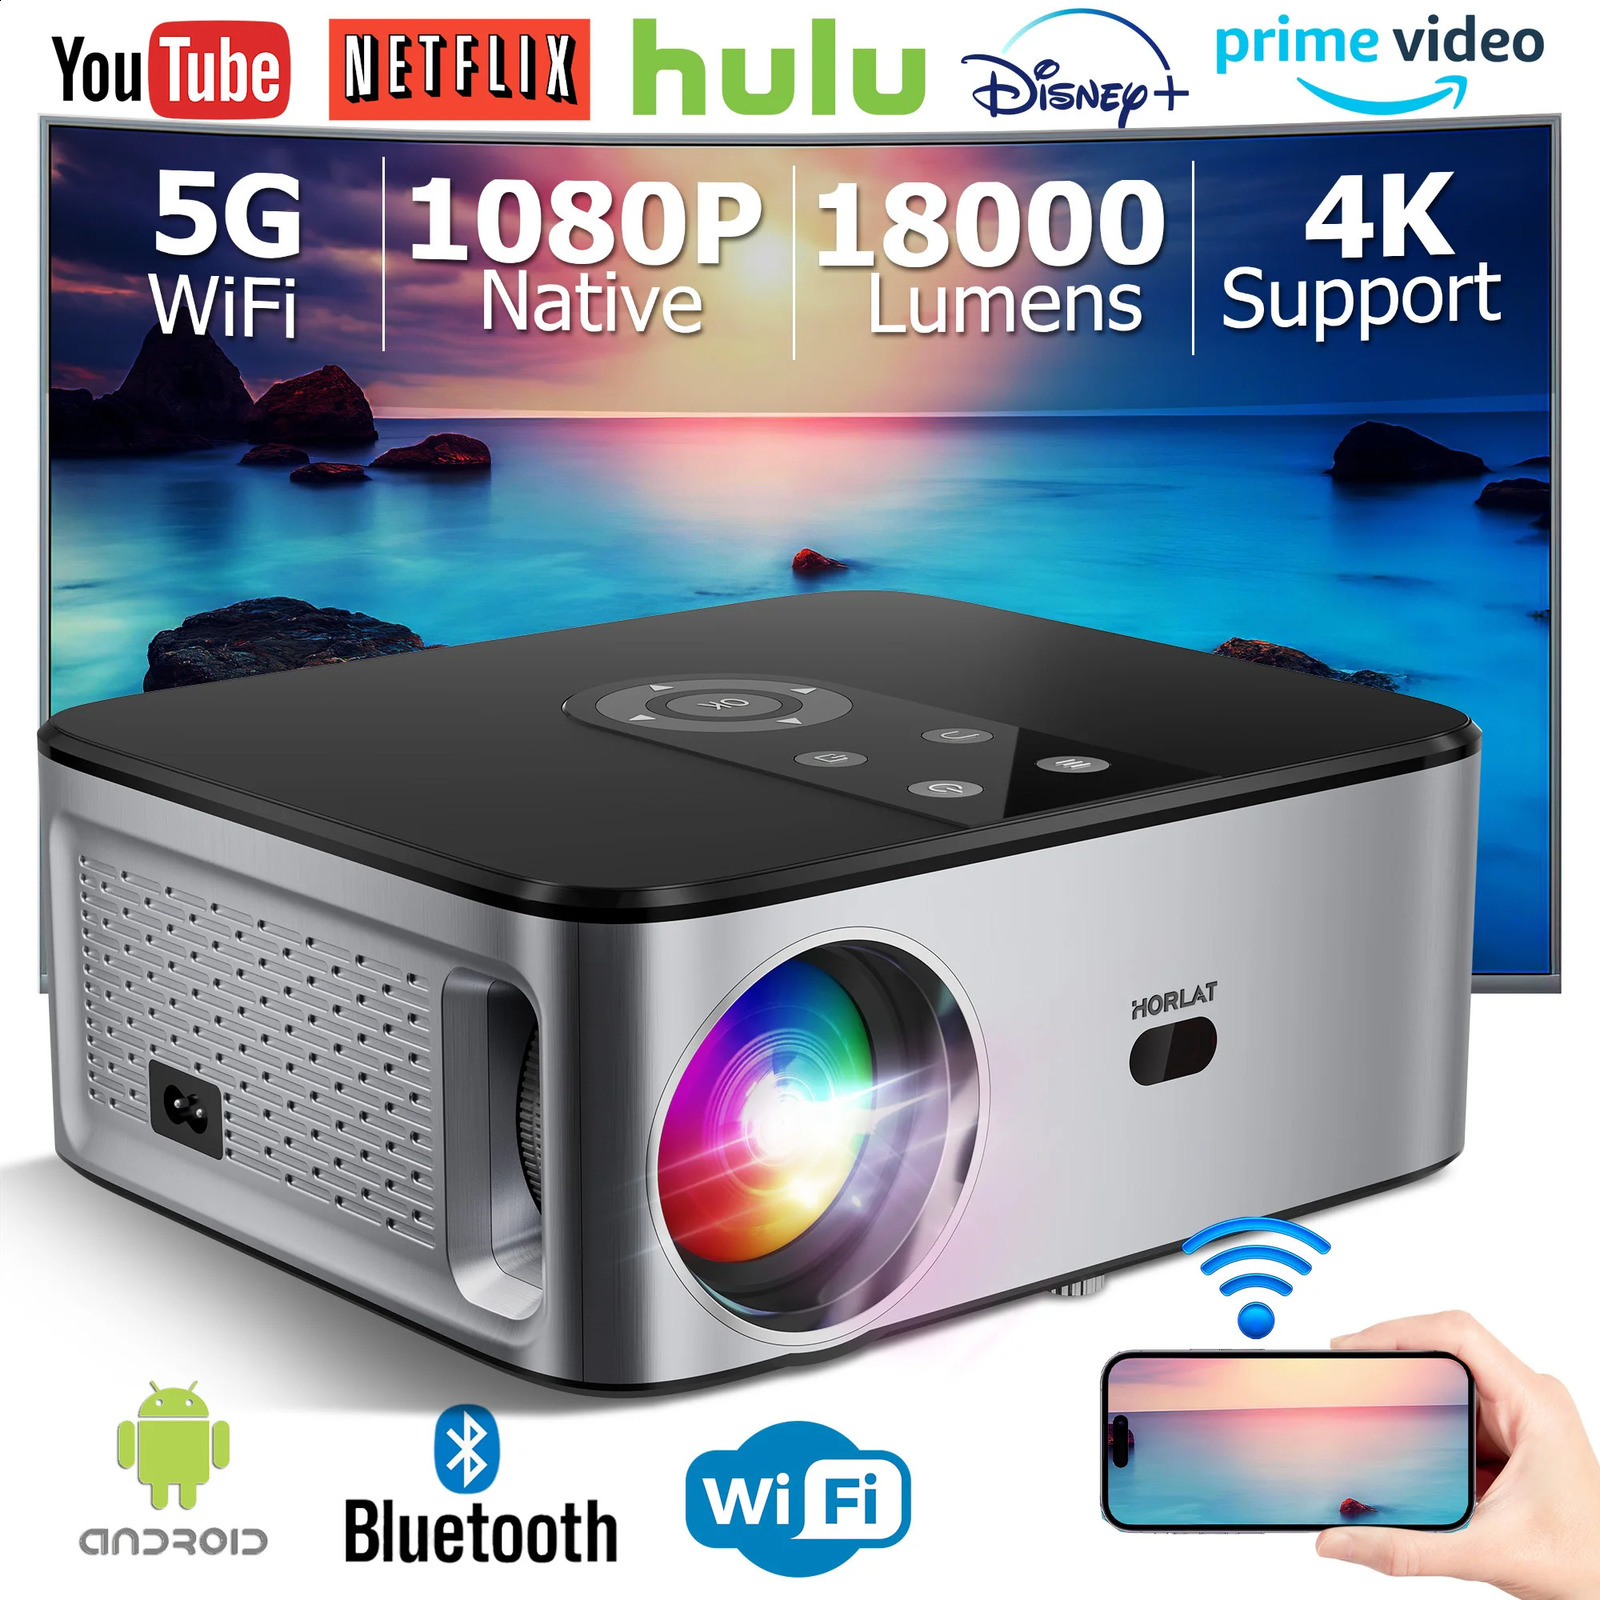 Horlat Android 4K LED Projector 700ansi Full HD 1080p Video Fares Homeate Auto Keystone 5G WIFI 18000 lubNUMENES Portable Proyector 240125